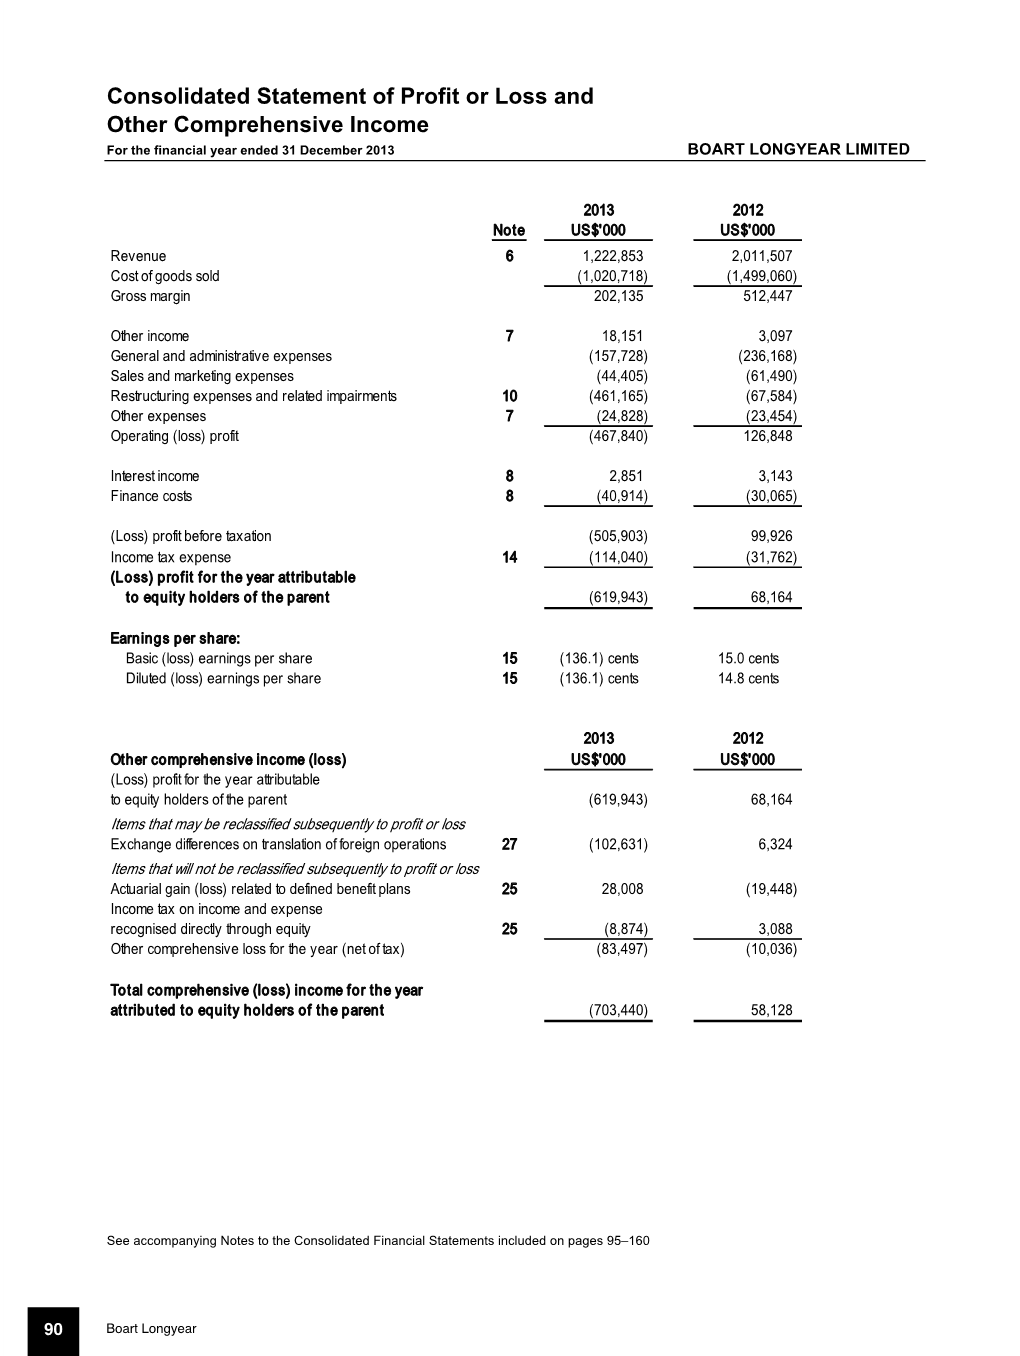 Annual Report 2013 Financial Statements